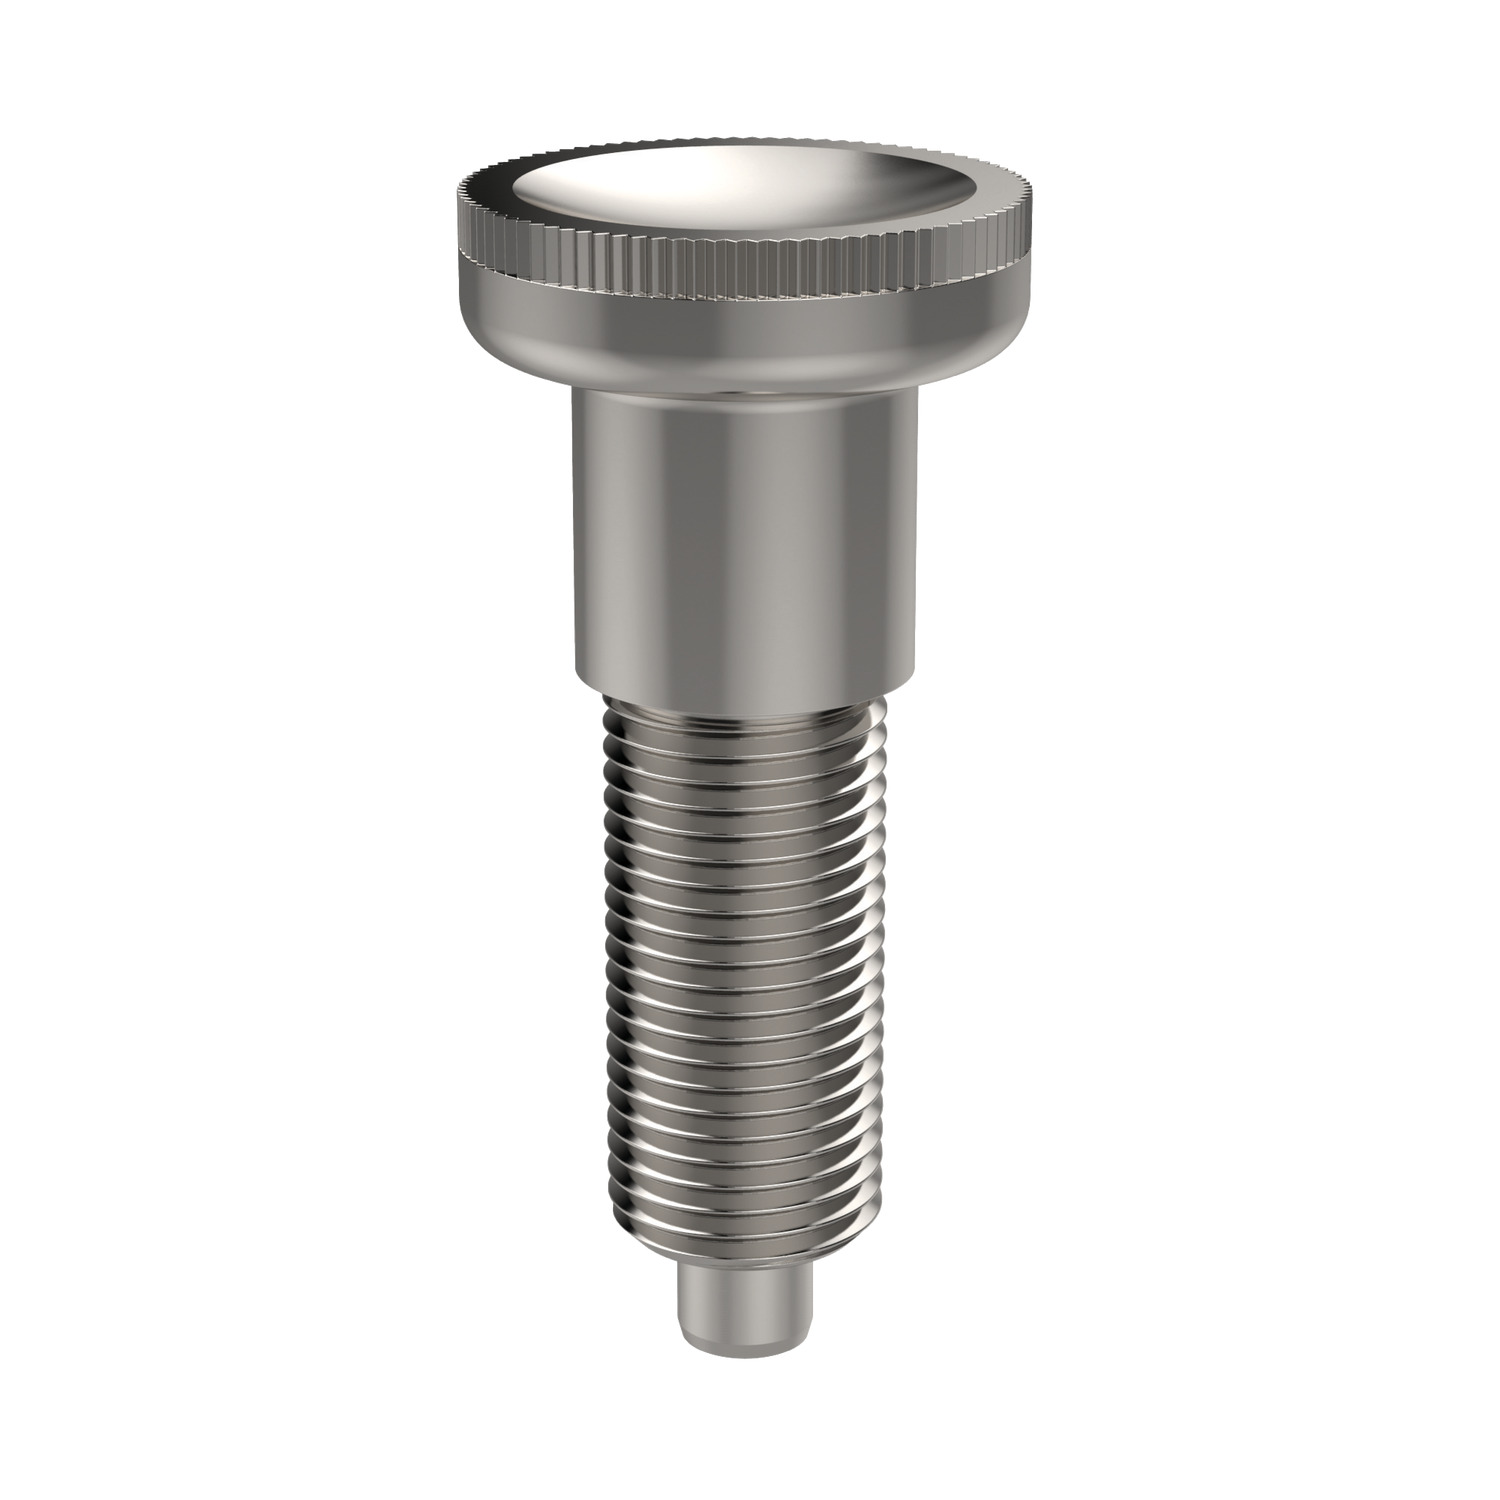 32742.W0707 All Stainless Steel Index Plunger M16 x 1.5. All Stainless.